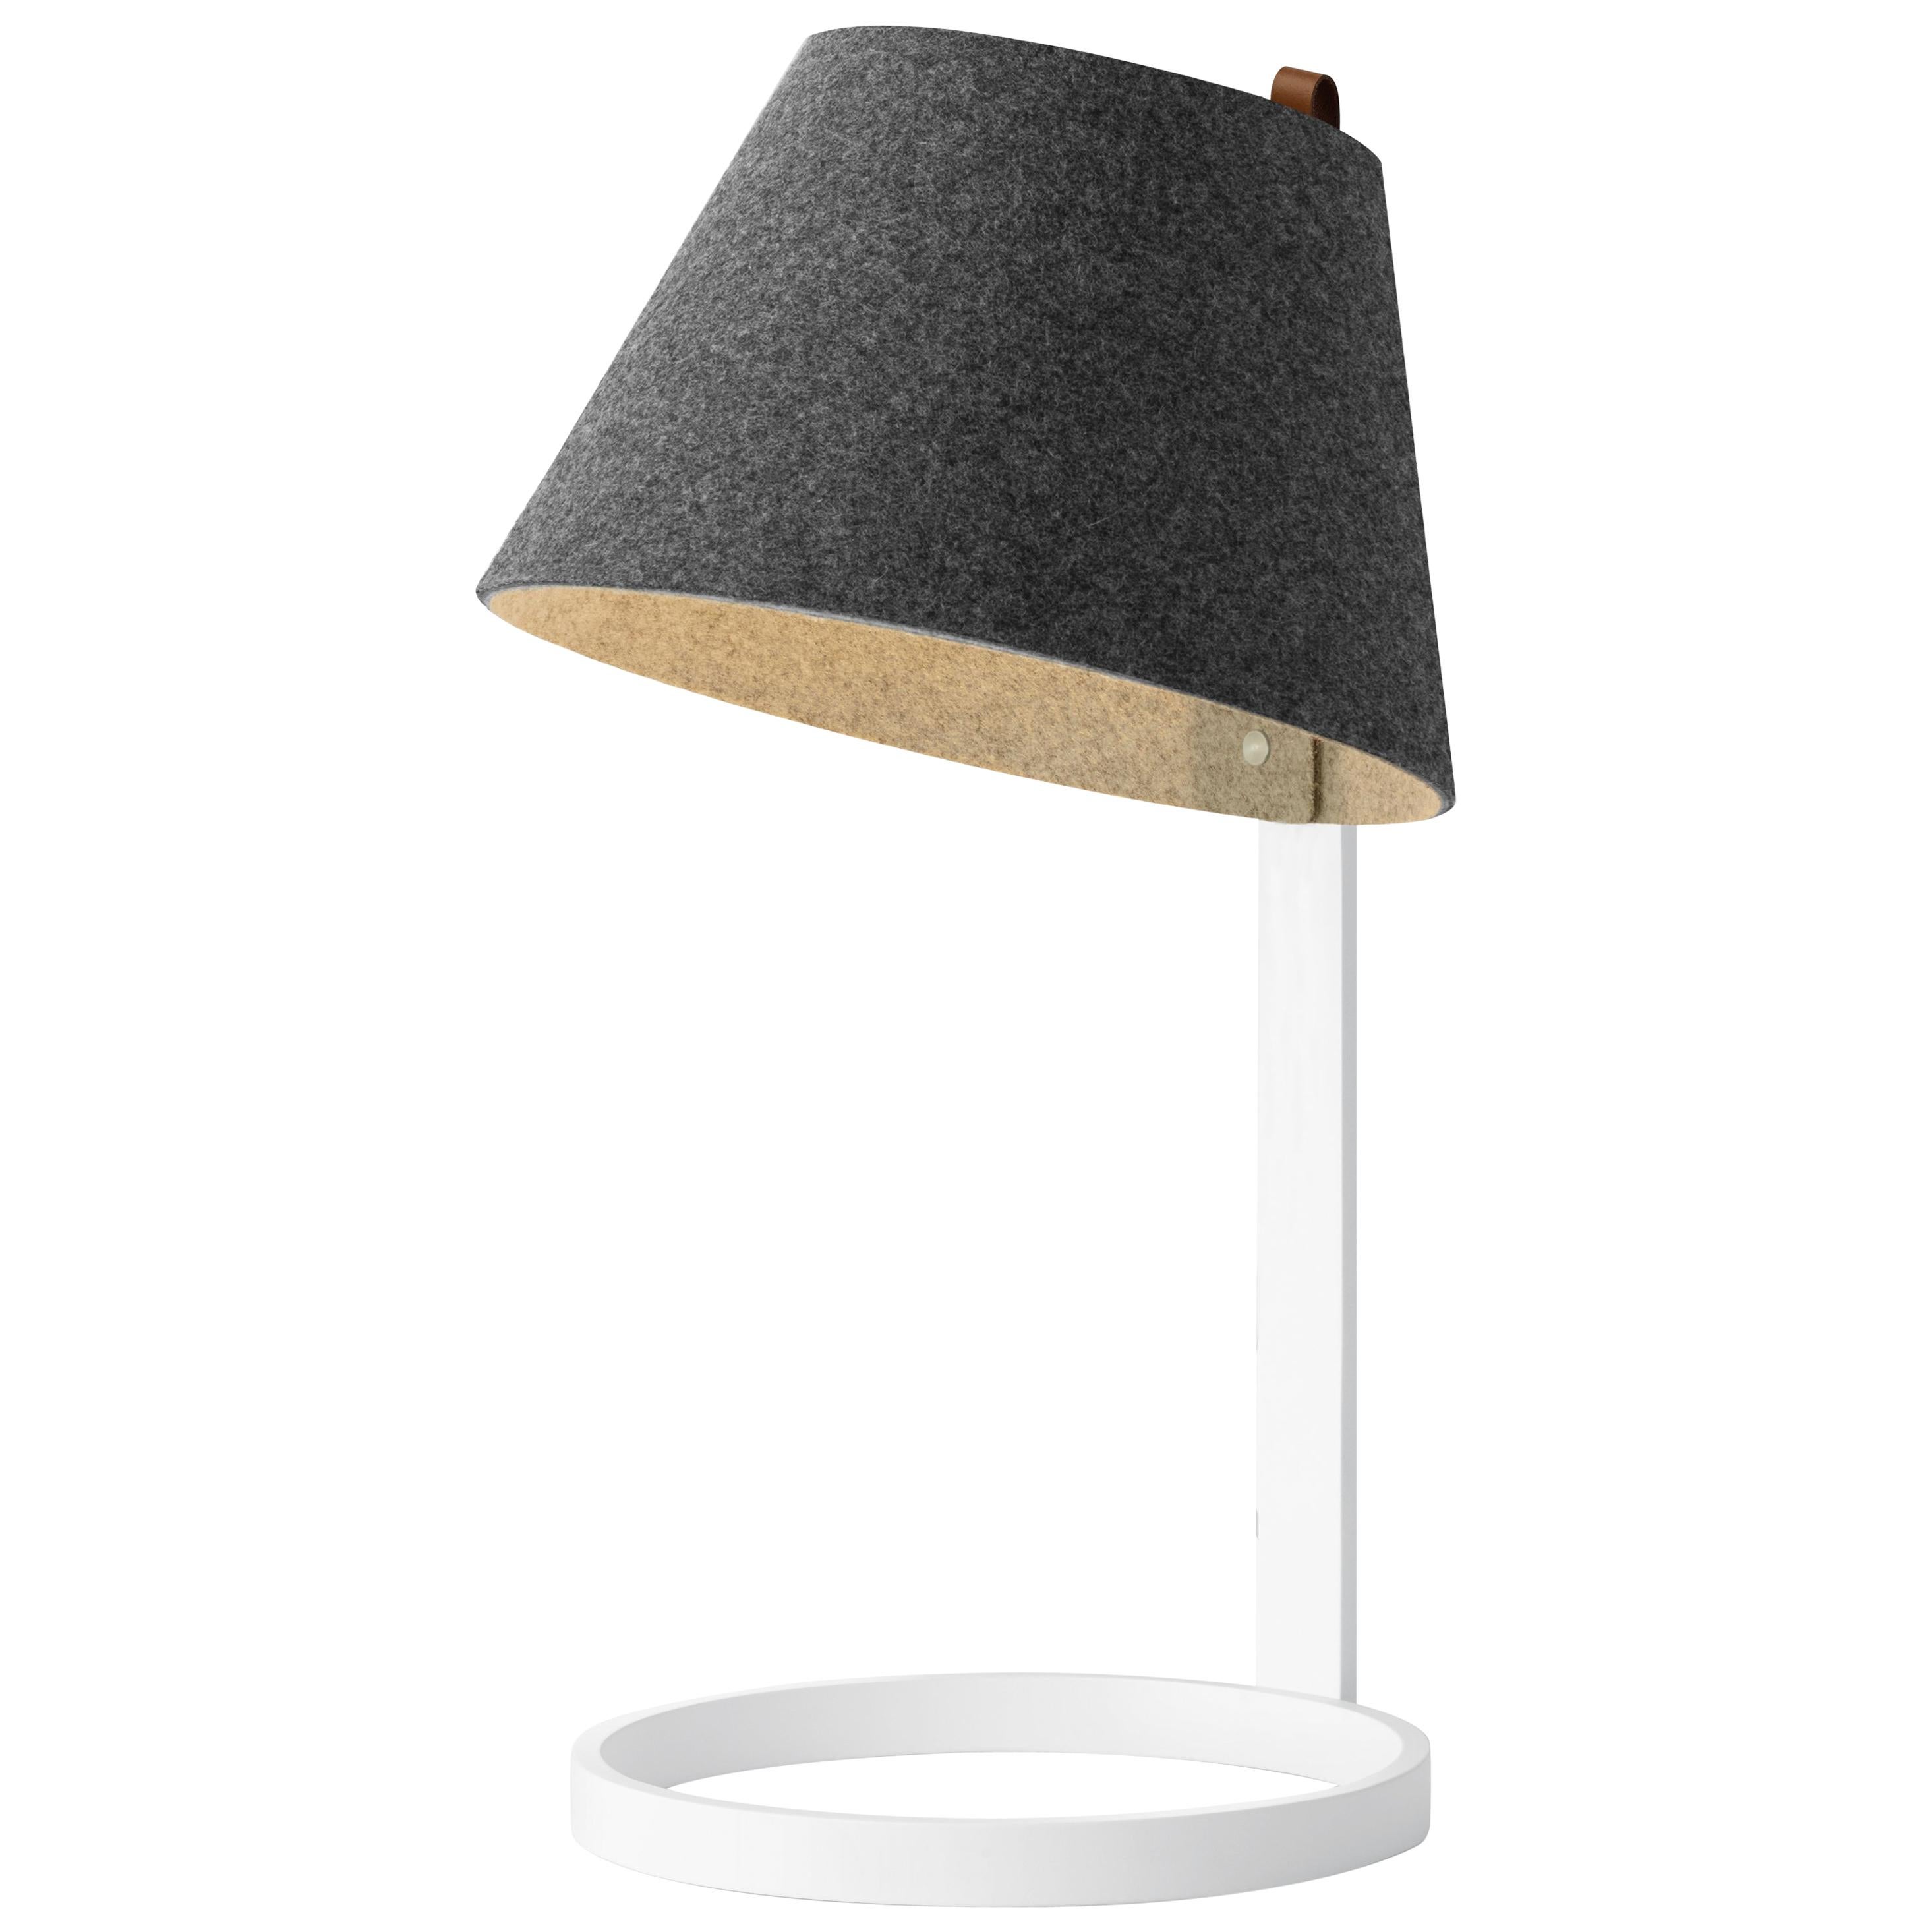 Lana Small Table Lamp in Charcoal and Grey with White Base by Pablo Designs For Sale